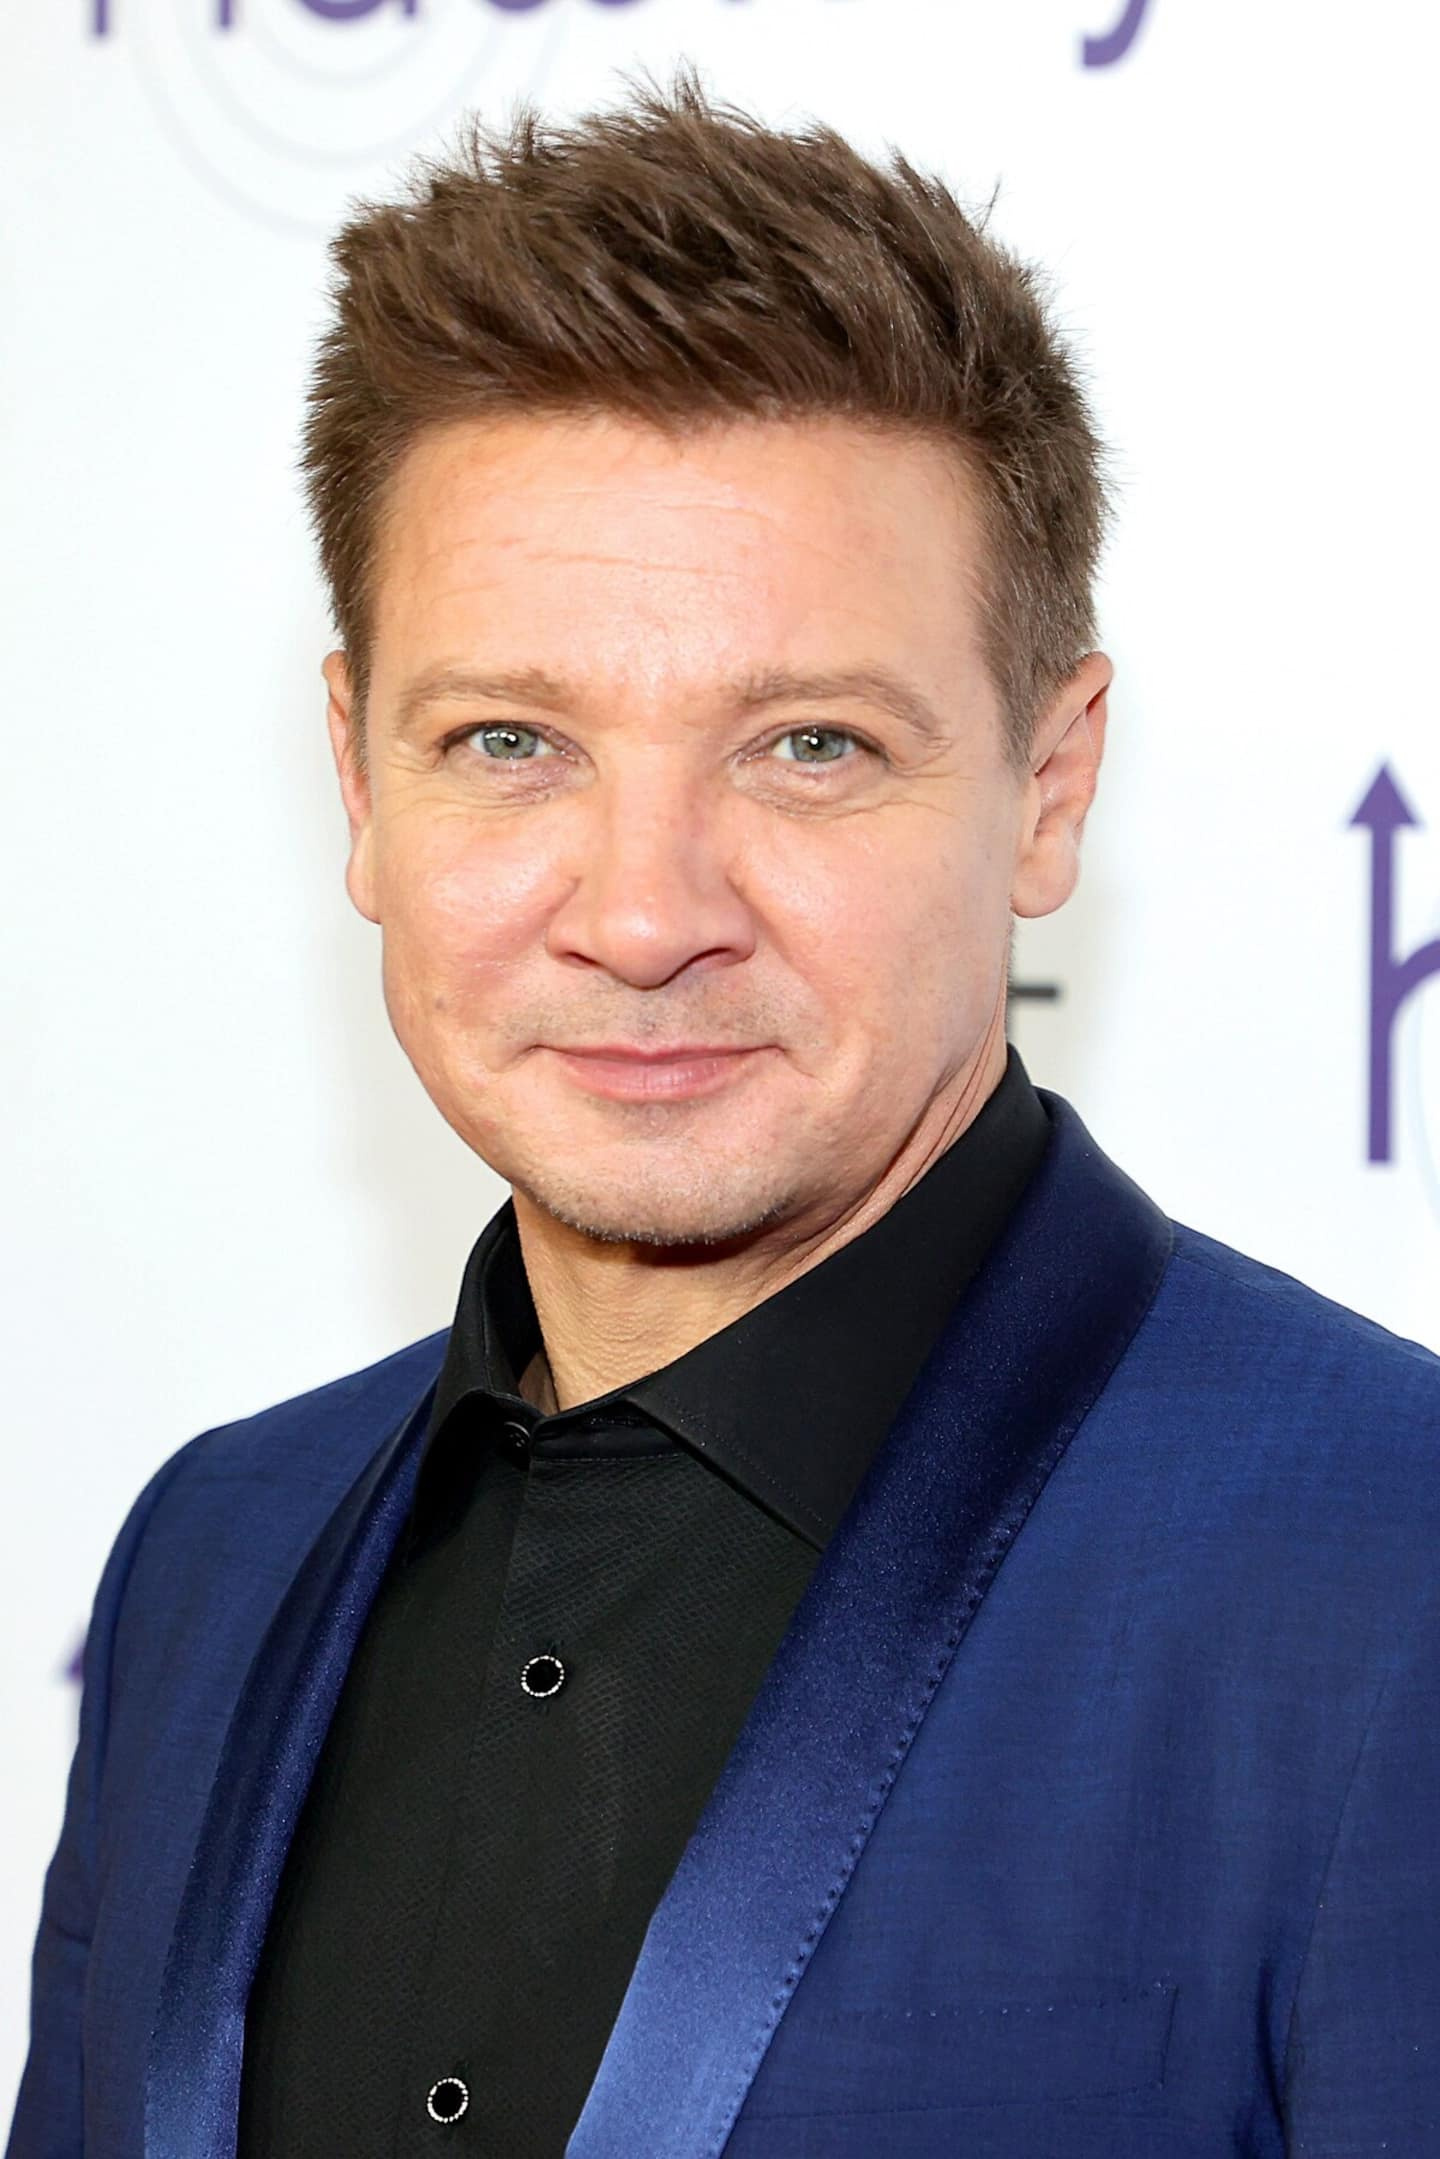 American star Jeremy Renner seriously injured while clearing snow (media)